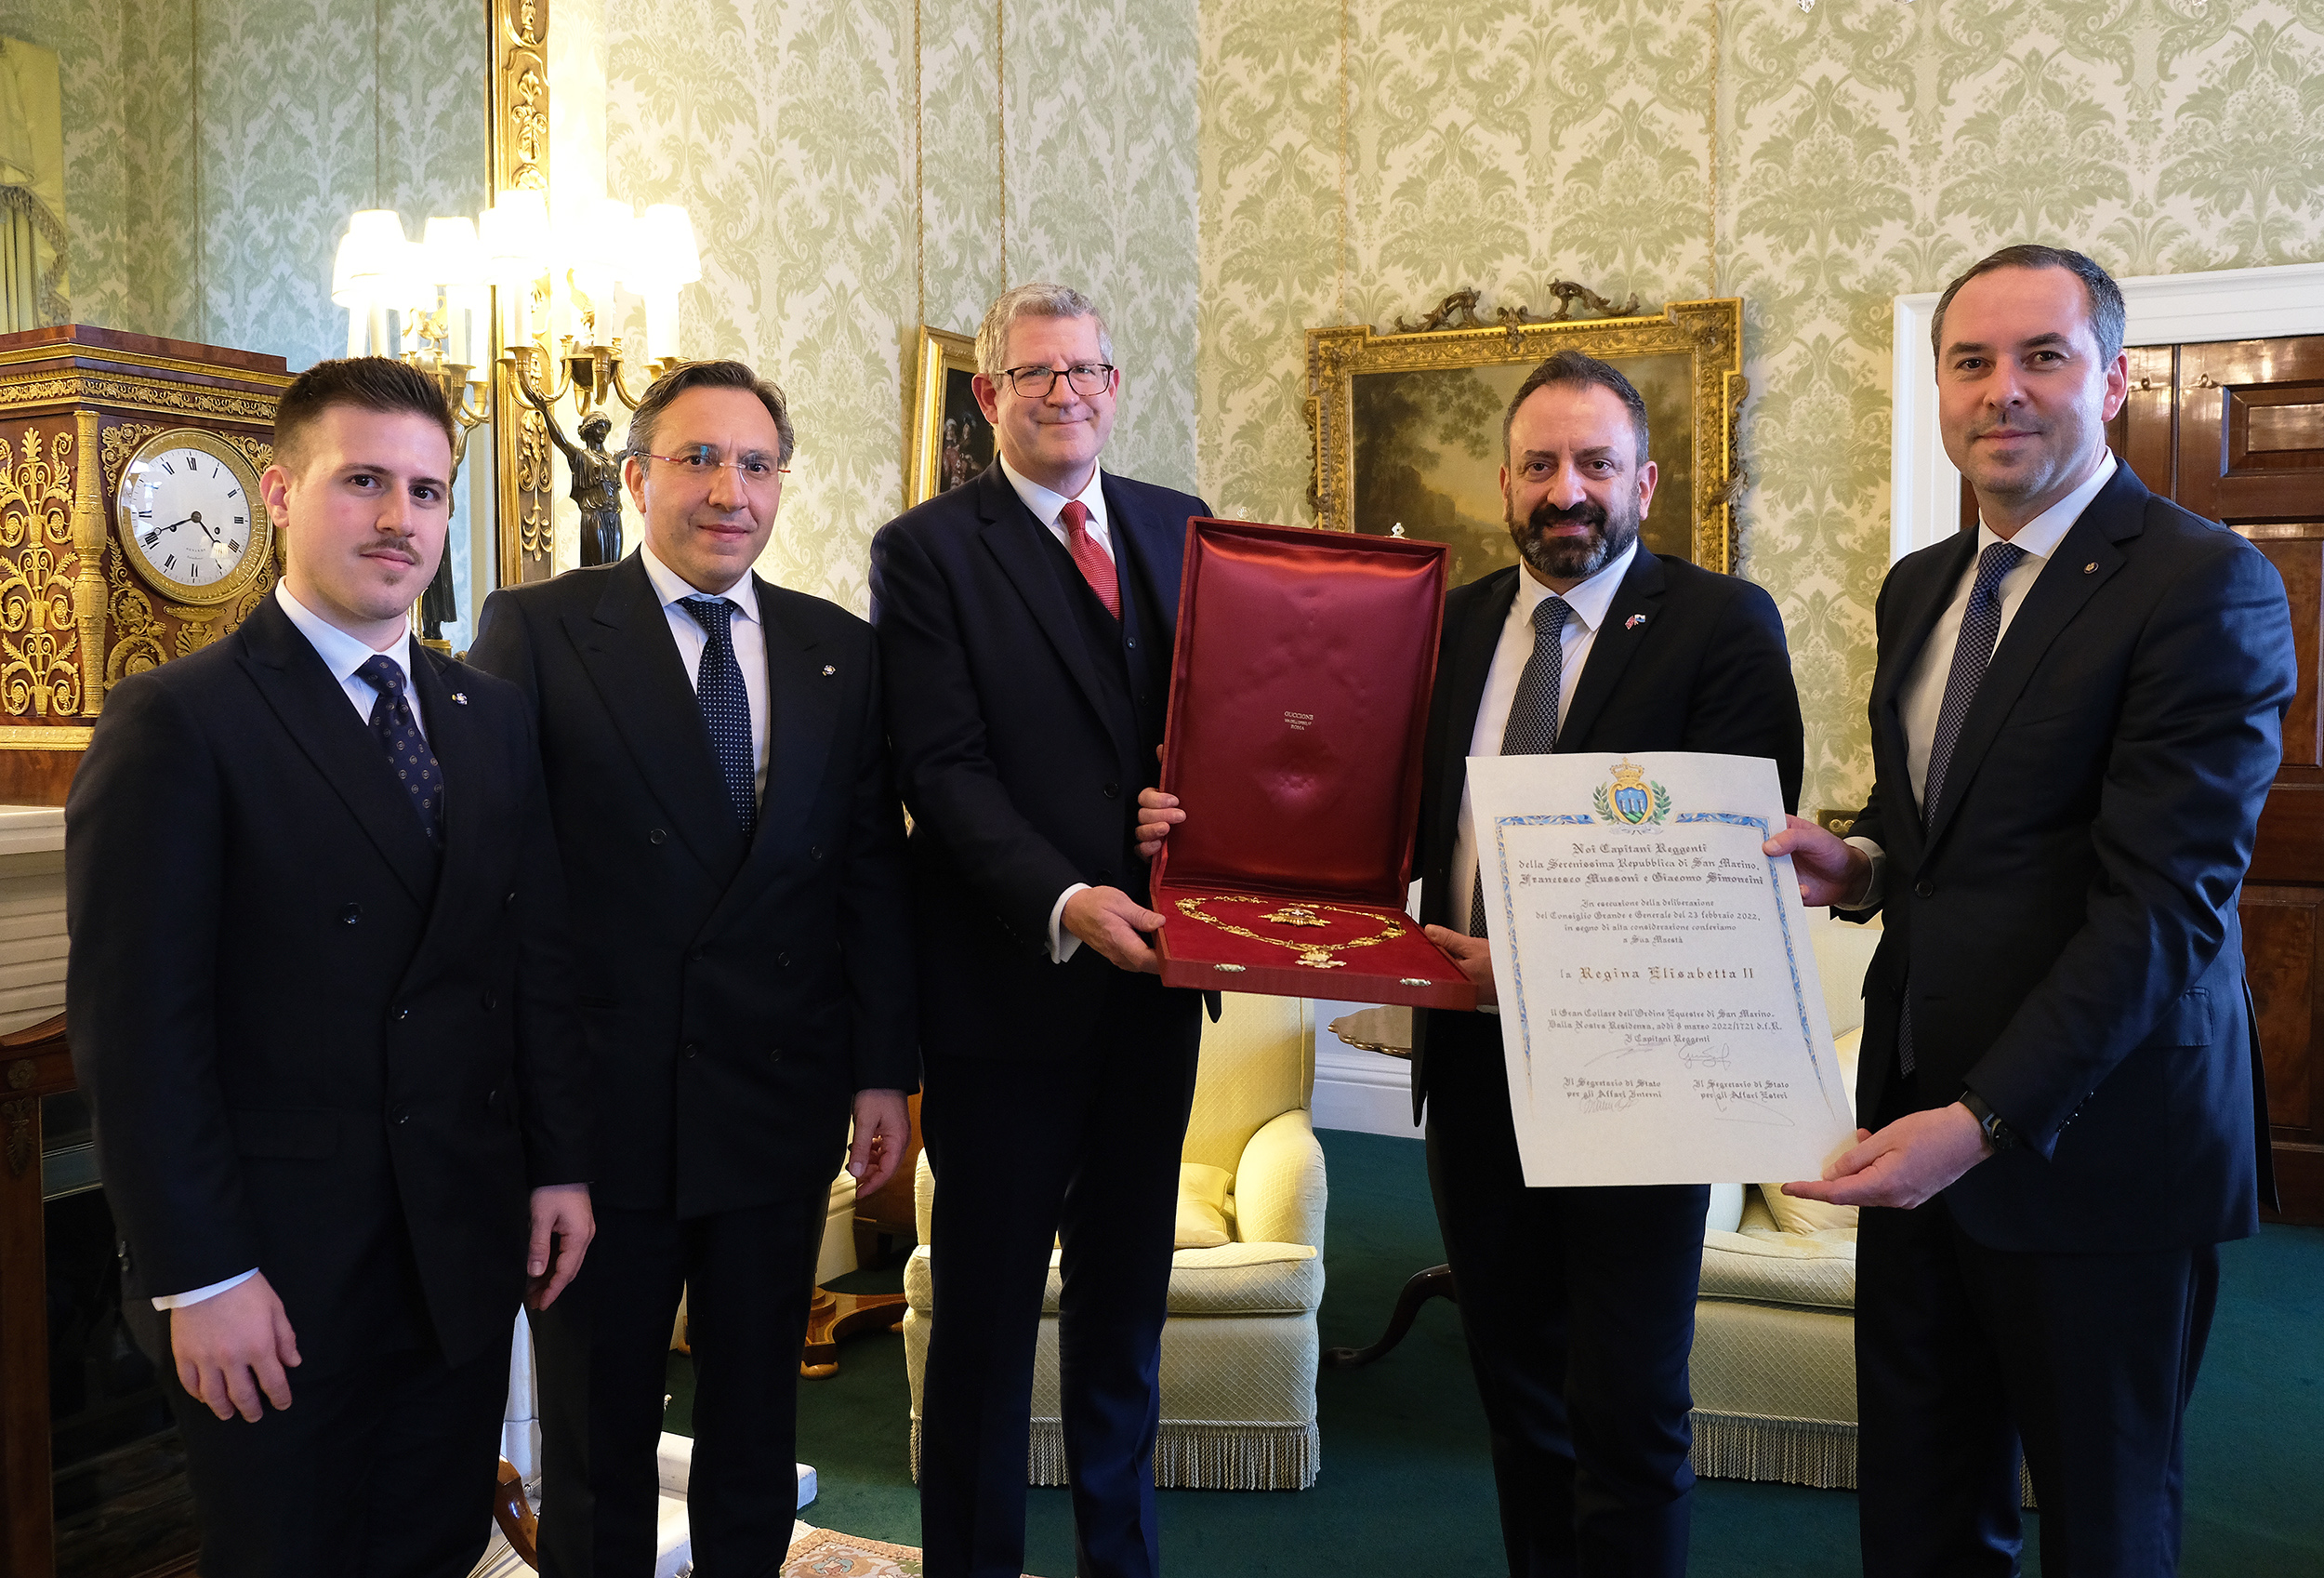 The Captains Regent of San Marino present the Equestrian Order of St Agatha